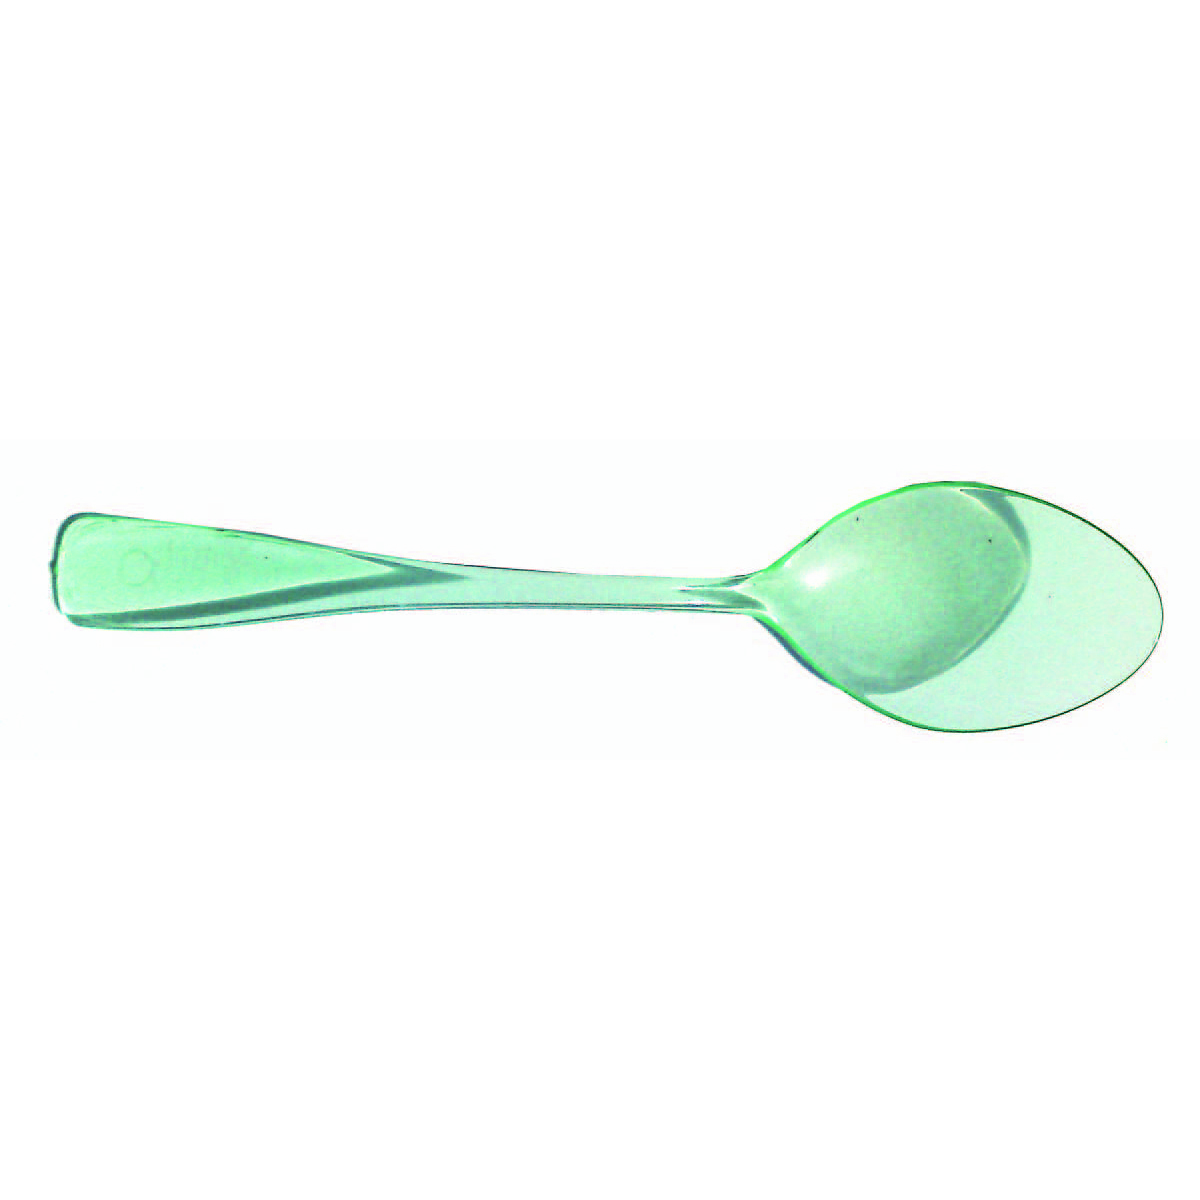 Picture of Packnwood 210CV0033V 3.7 in. Mini Green Transparent Spoon